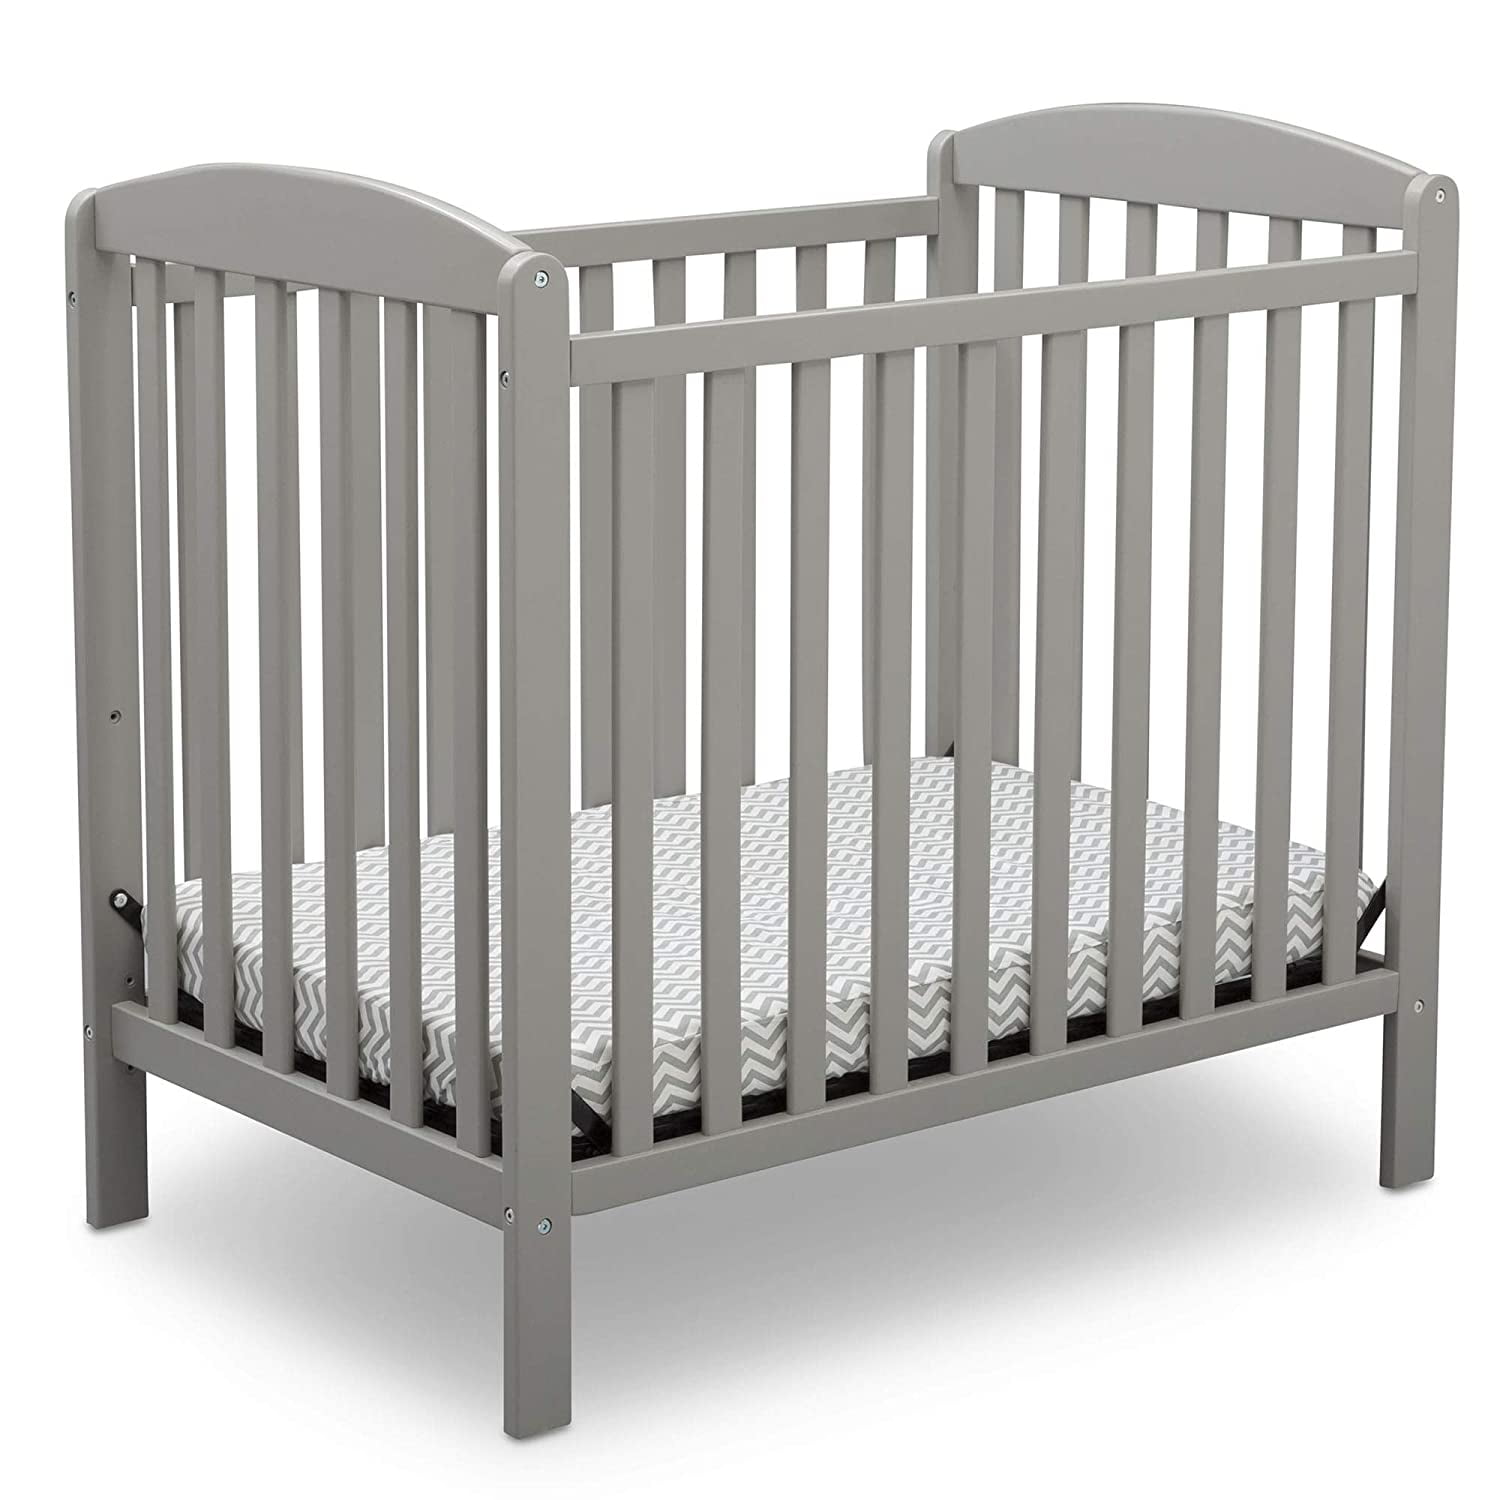 Grey cot bumper of 60x120cm (for DIEM cot) from Carezza collection